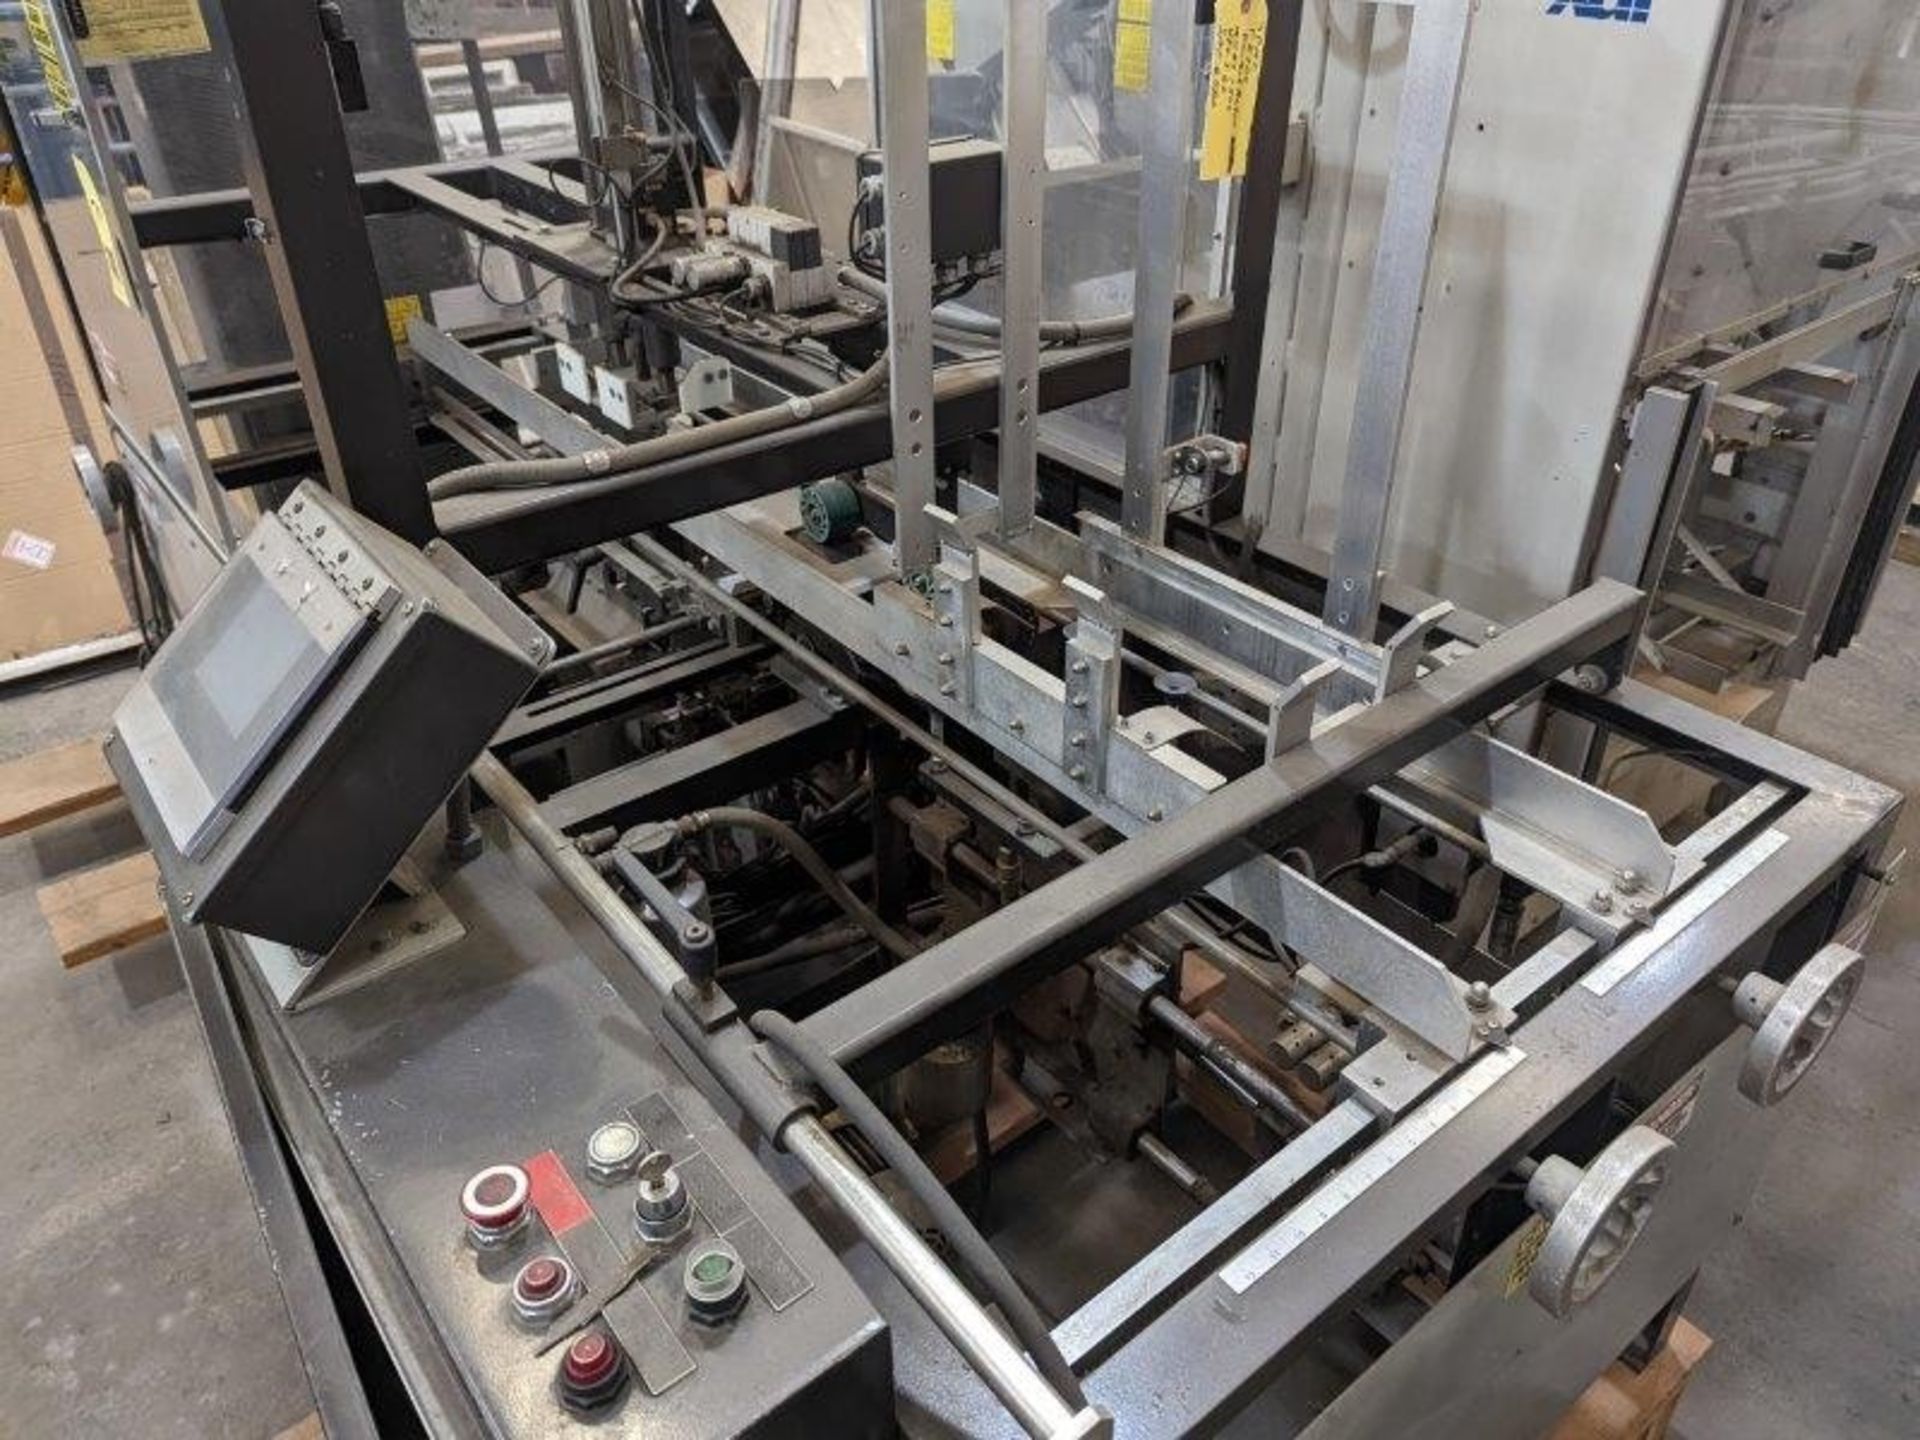 SPMC (Southern Packaging) Automatic Tray Former for Self-Locking Trays; Model TE700VF DOUBLELOCK ( - Image 2 of 5